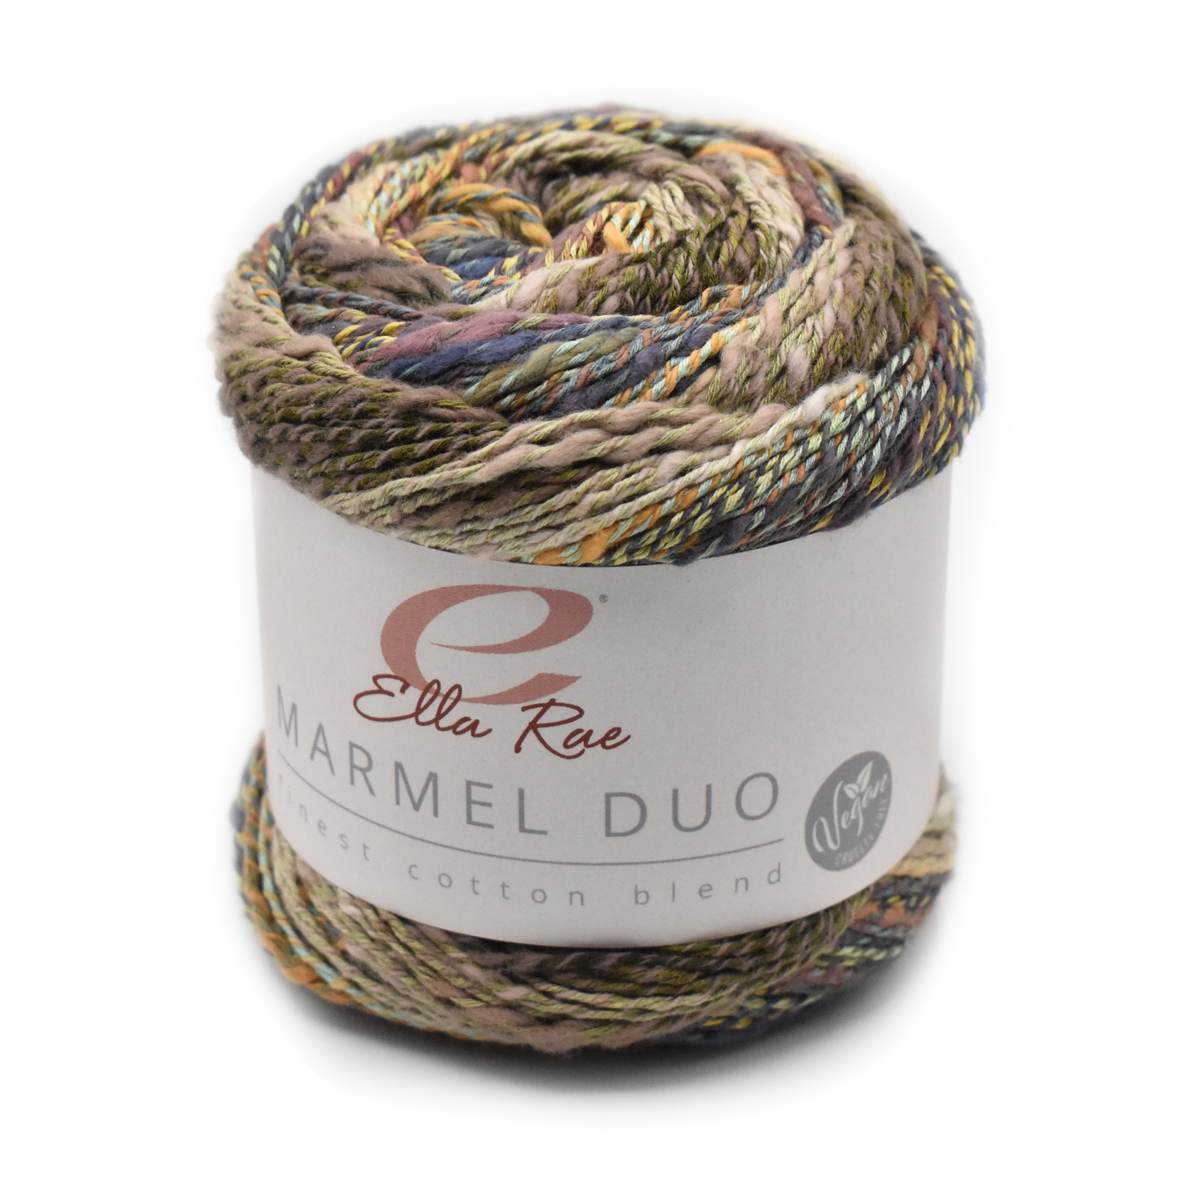 a skein of Marmel Duo